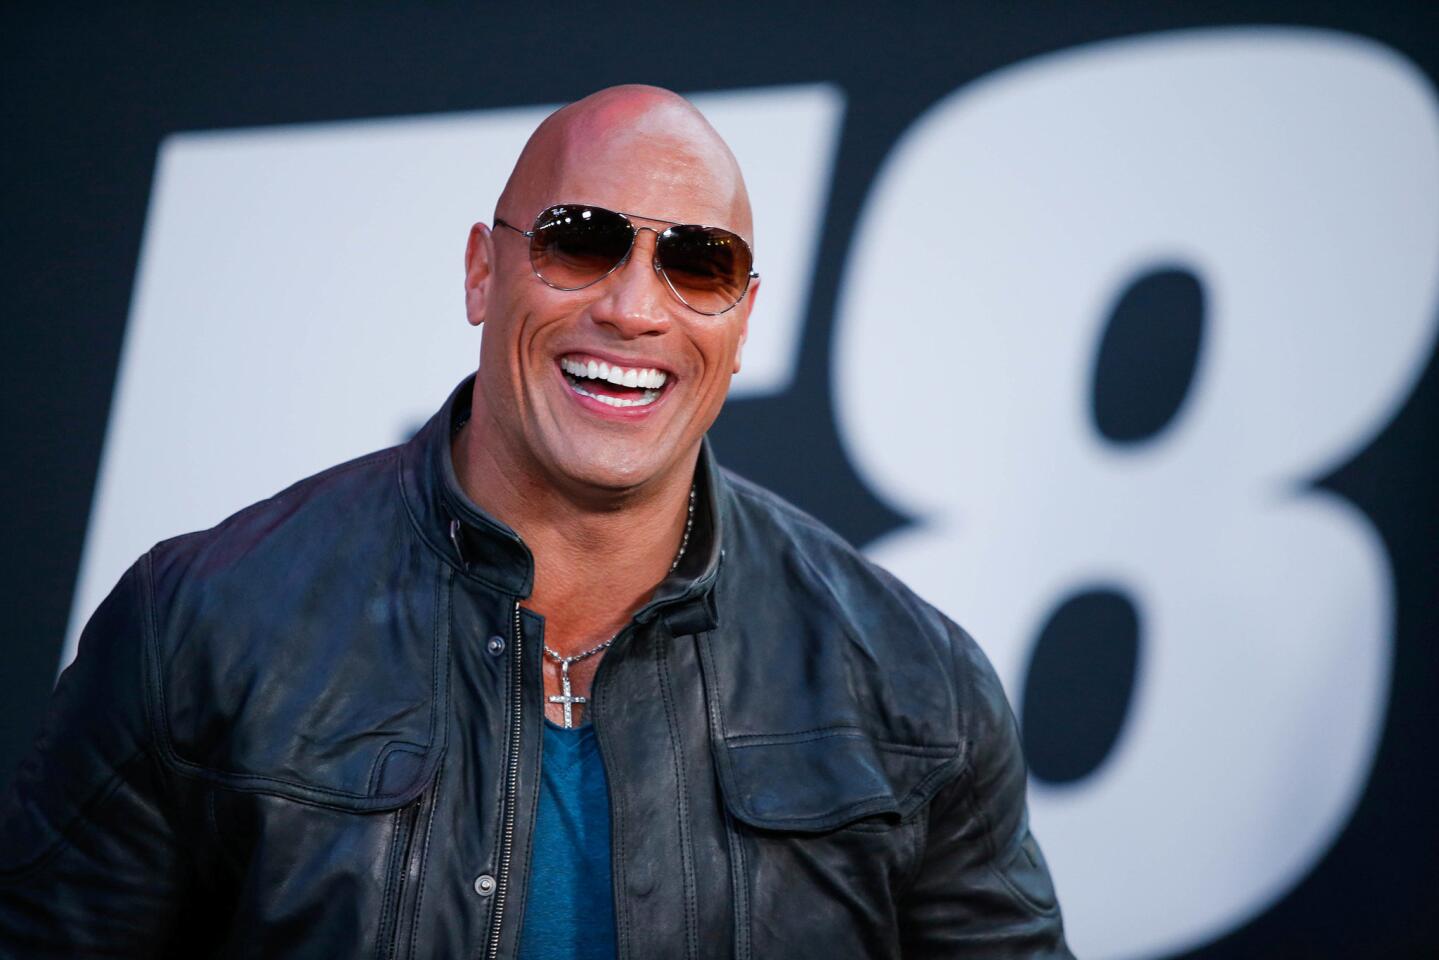 Dwayne Johnson attends 'The Fate Of The Furious' New York premiere at Radio City Music Hall in New York